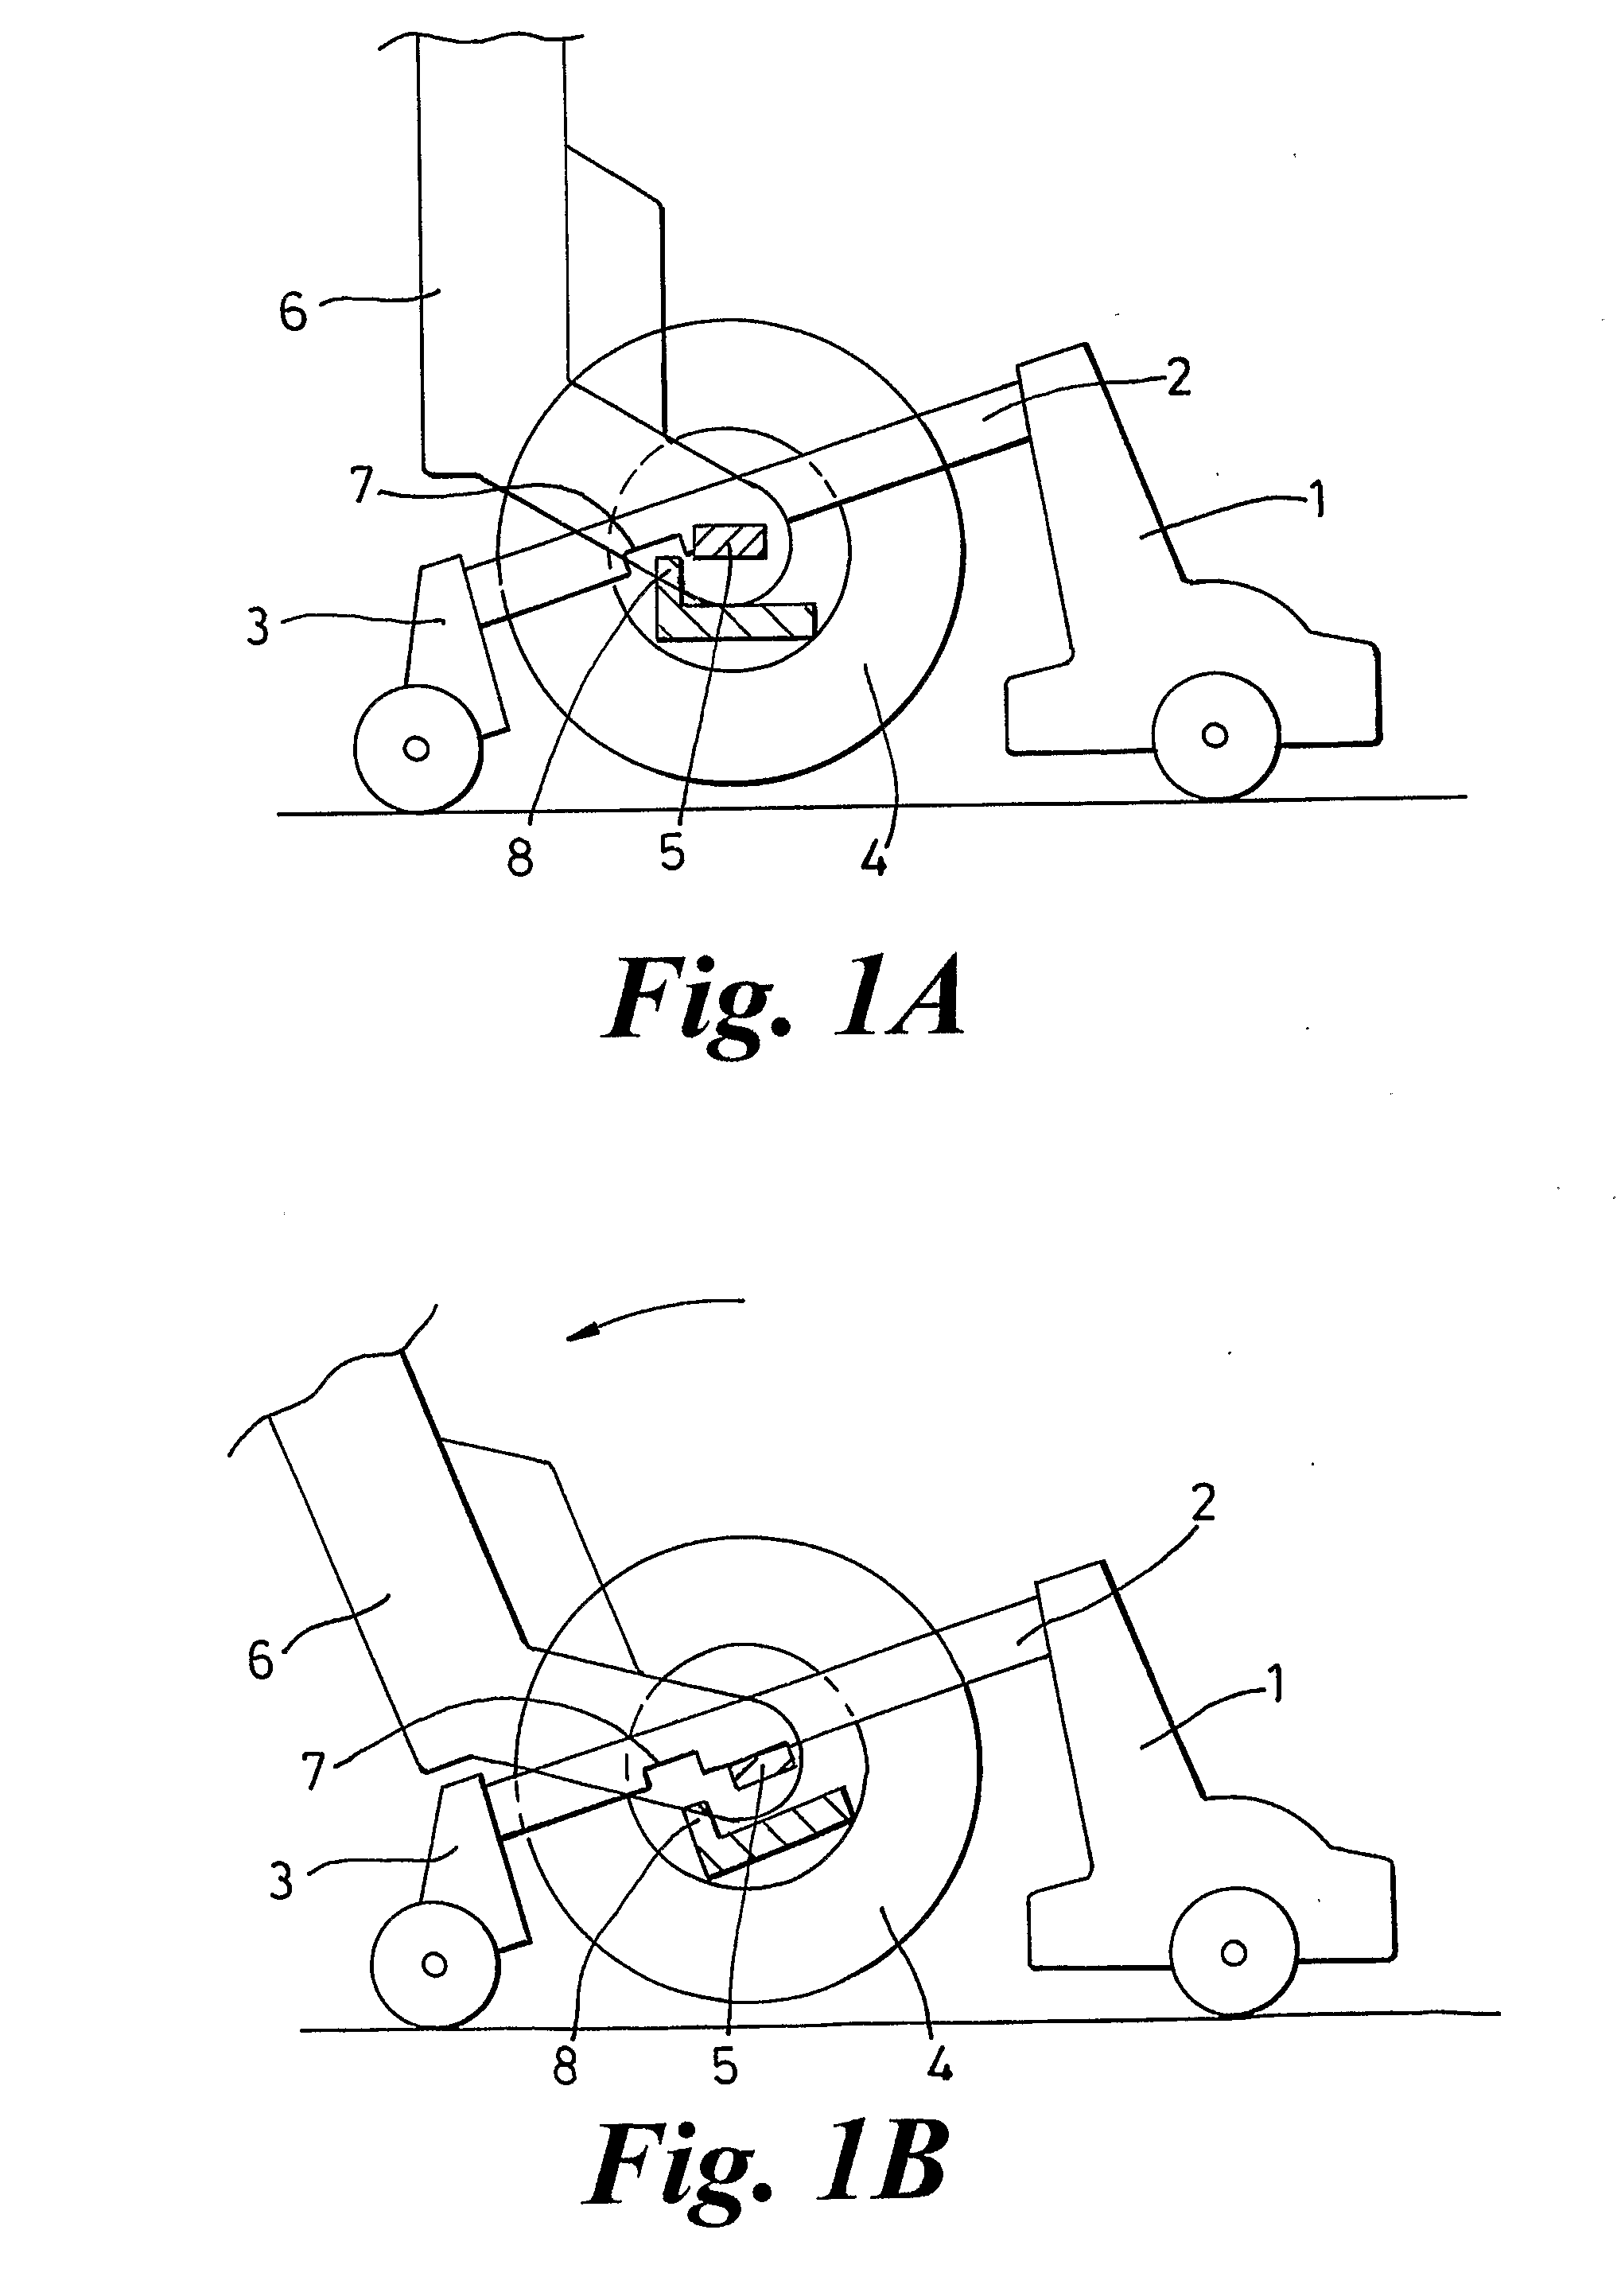 Vacuum Cleaner with Suction Head with Locking Means of Pivotal Movement About Axis of Rotation